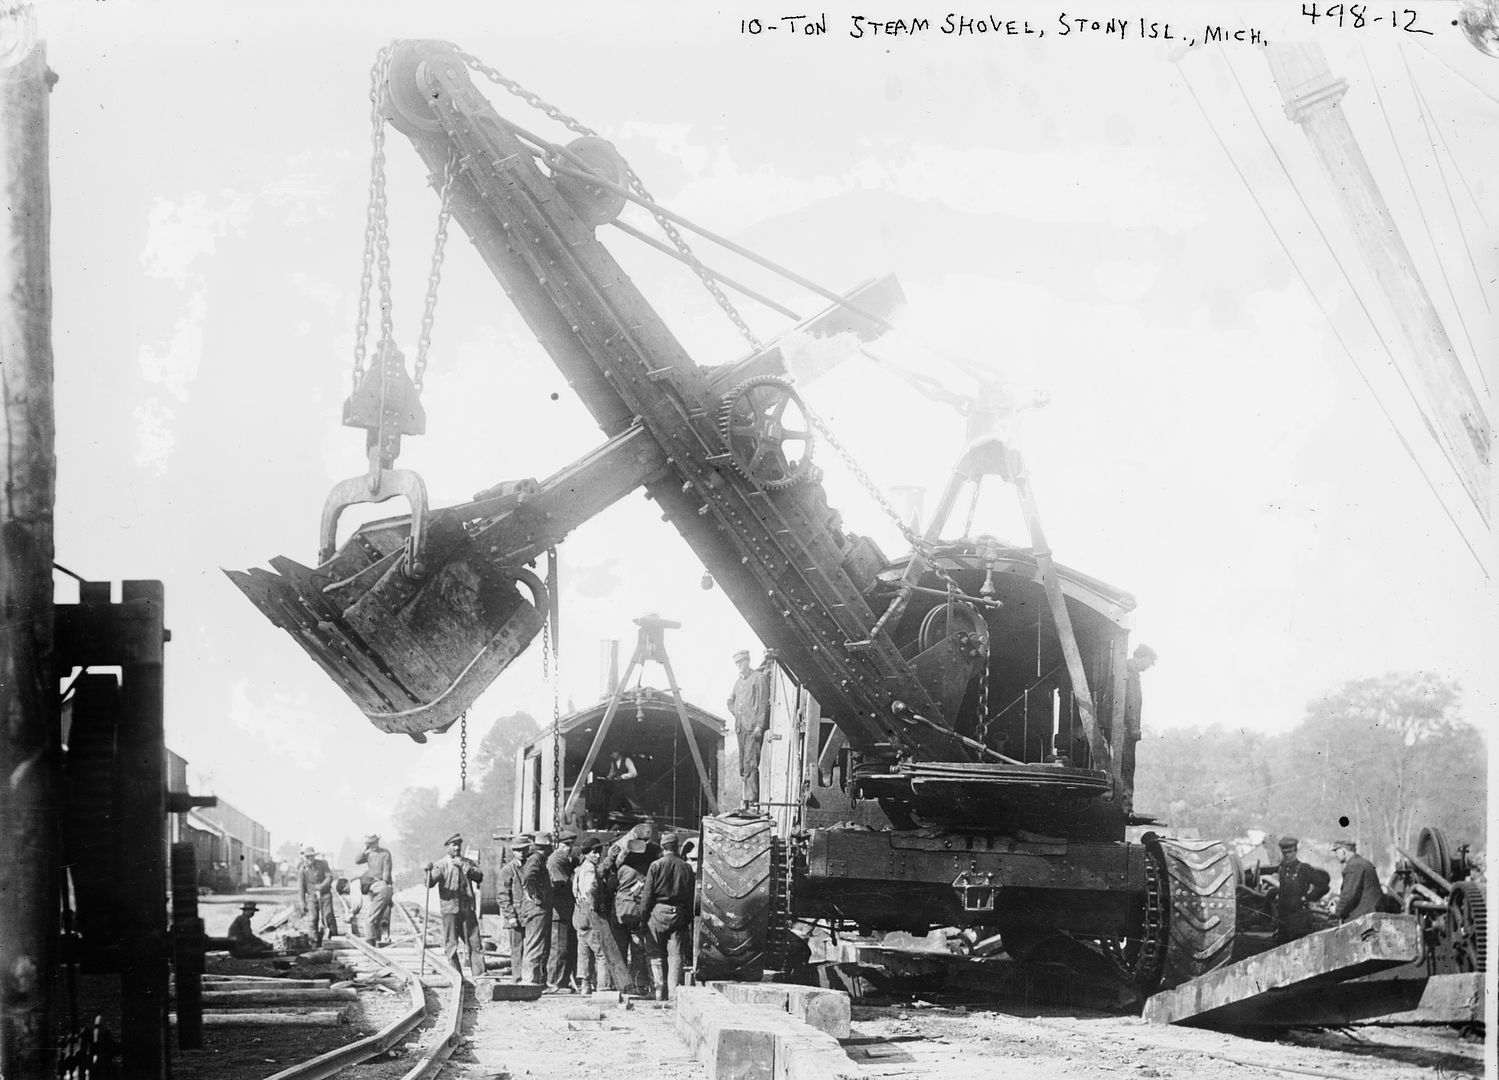 And his steam shovel фото 24